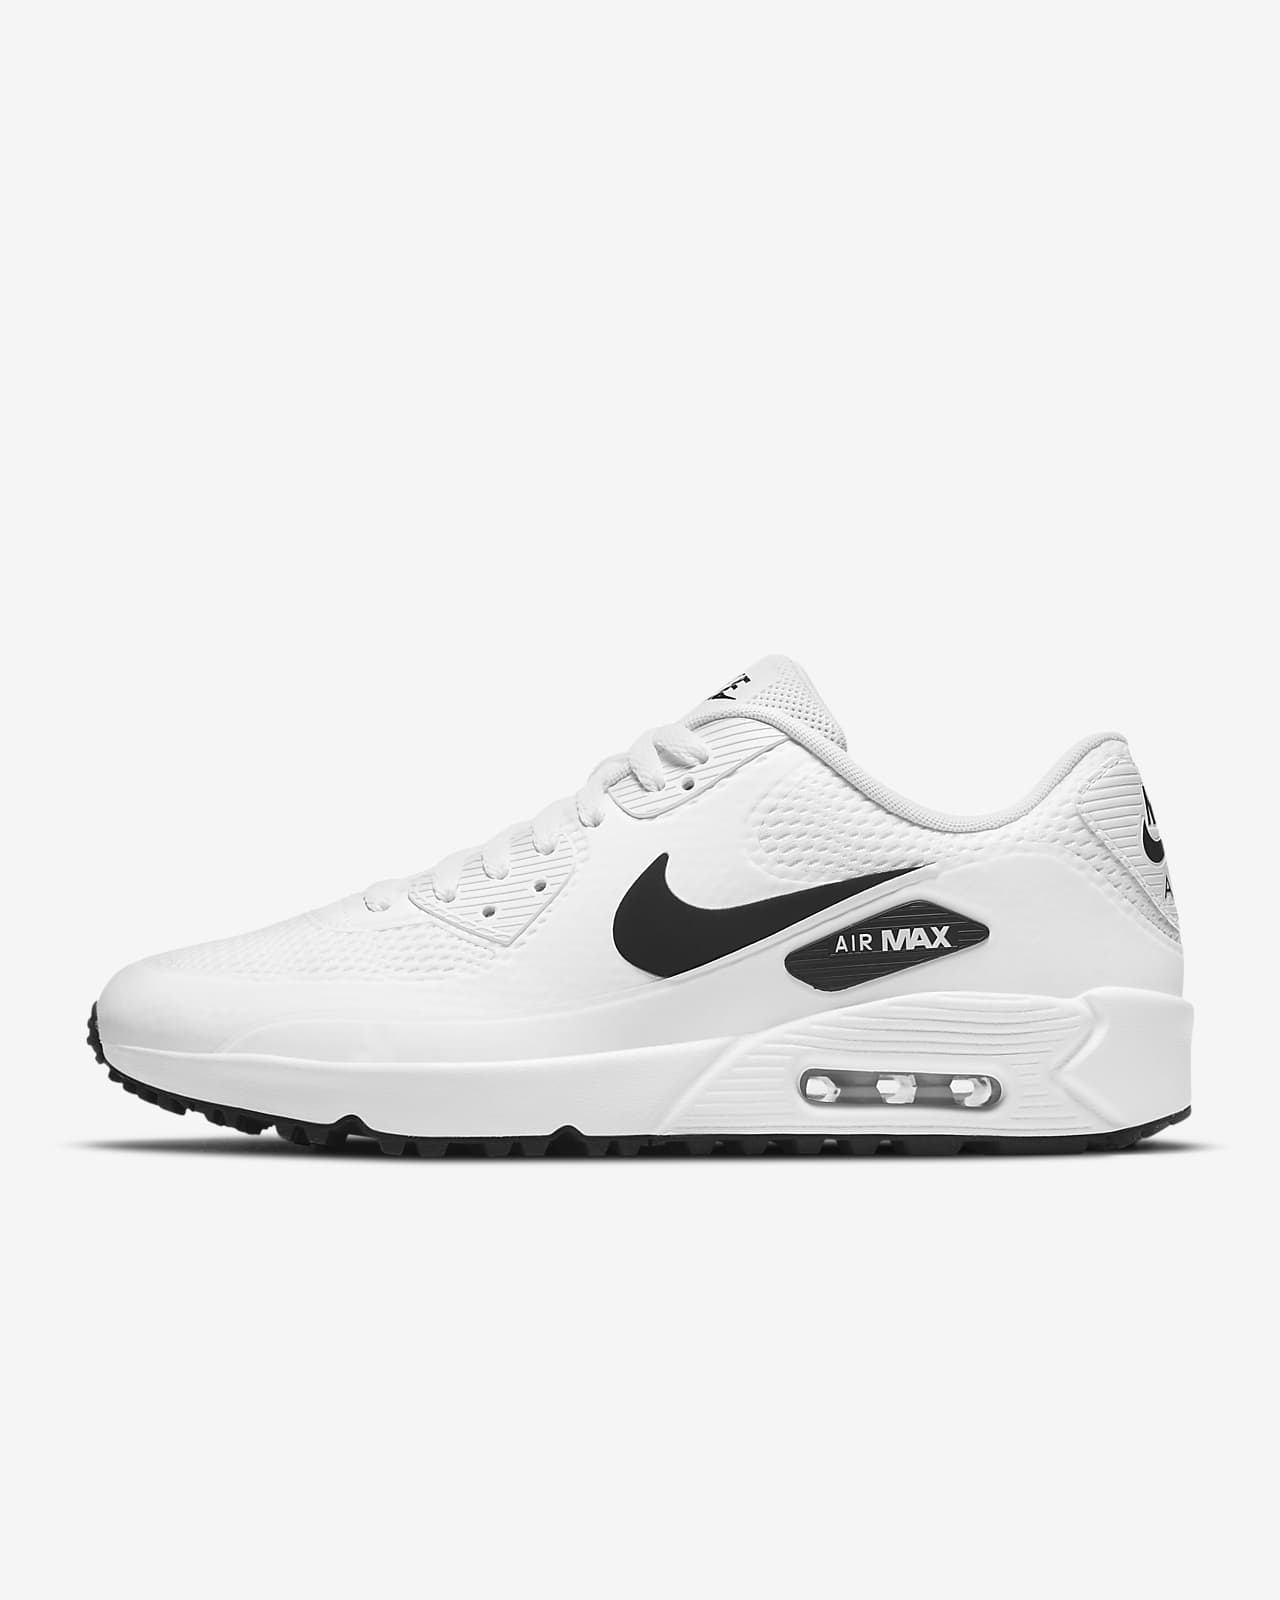 nike air max golf shoes review